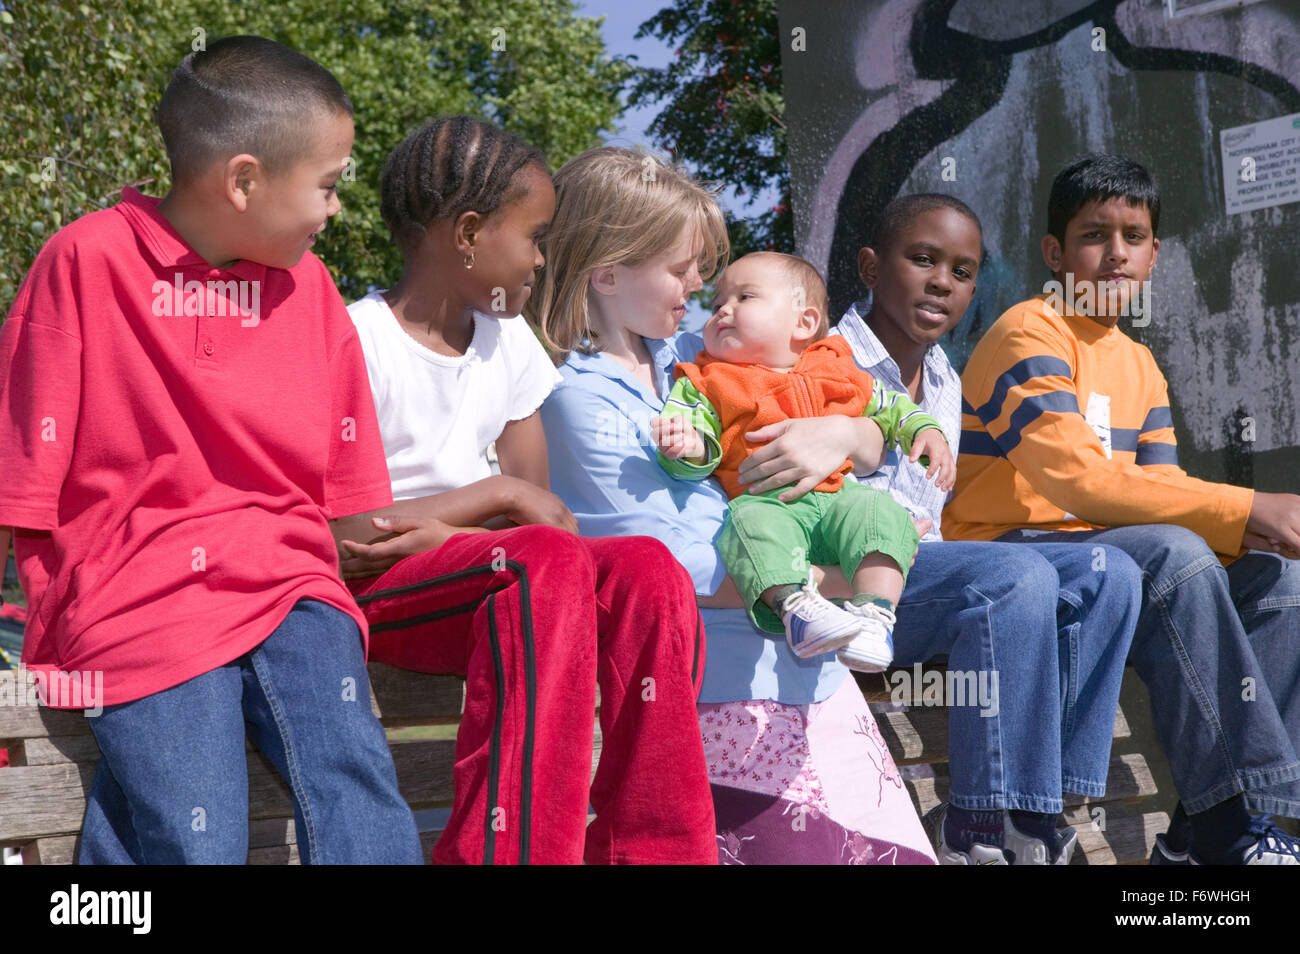 Group of young friends out in the park together; one of them holding a baby, Stock Photo